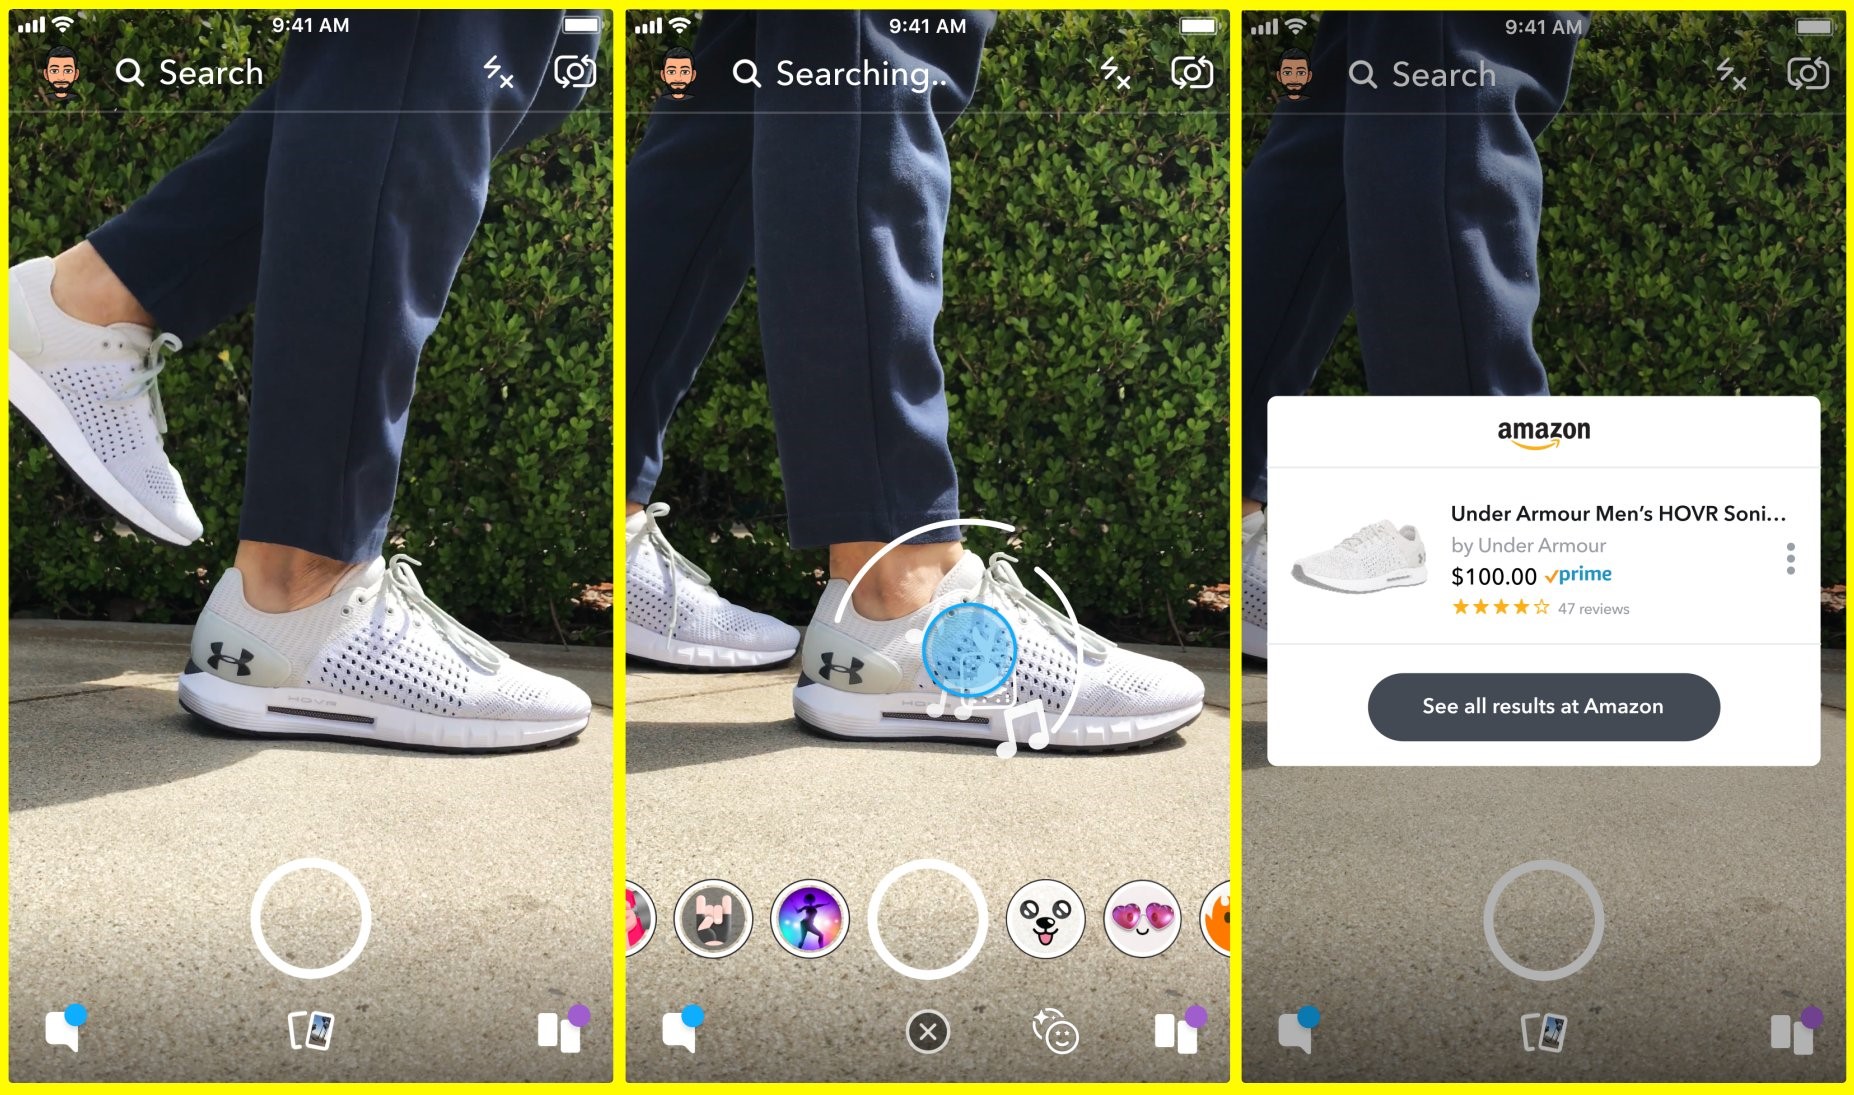 Snapchat Stories allows you to point the camera at a product